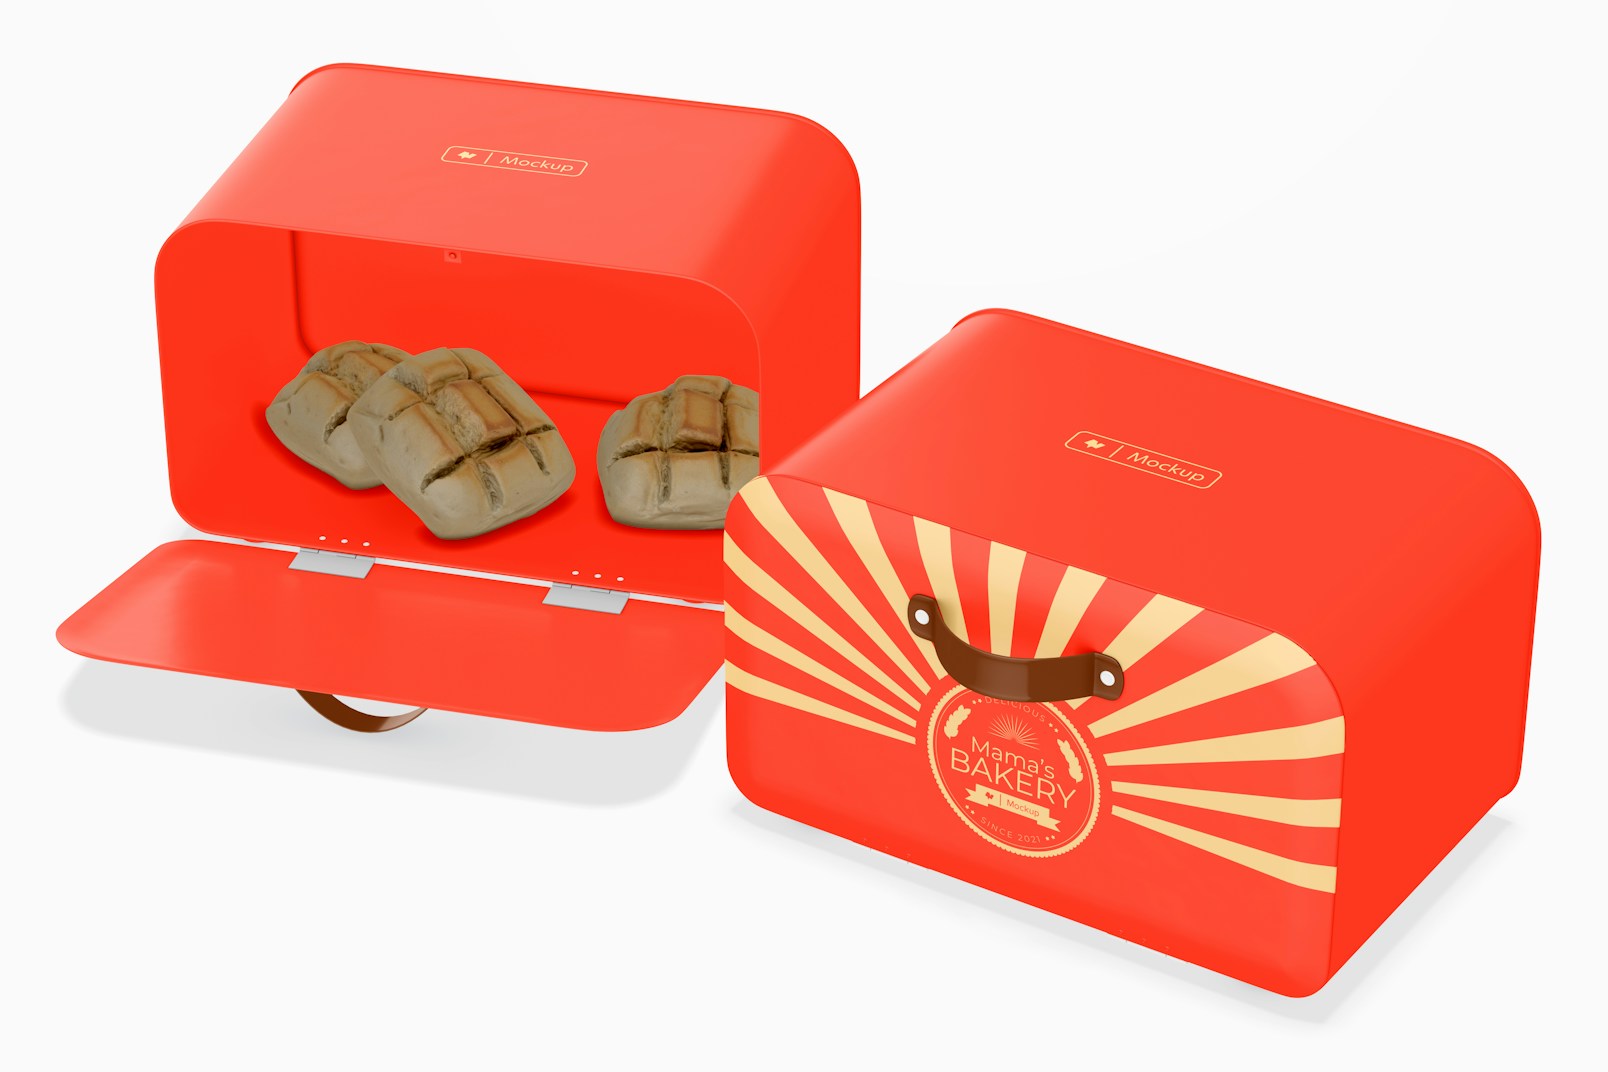 Retro Style Bread Boxes Mockup, Opened and Closed